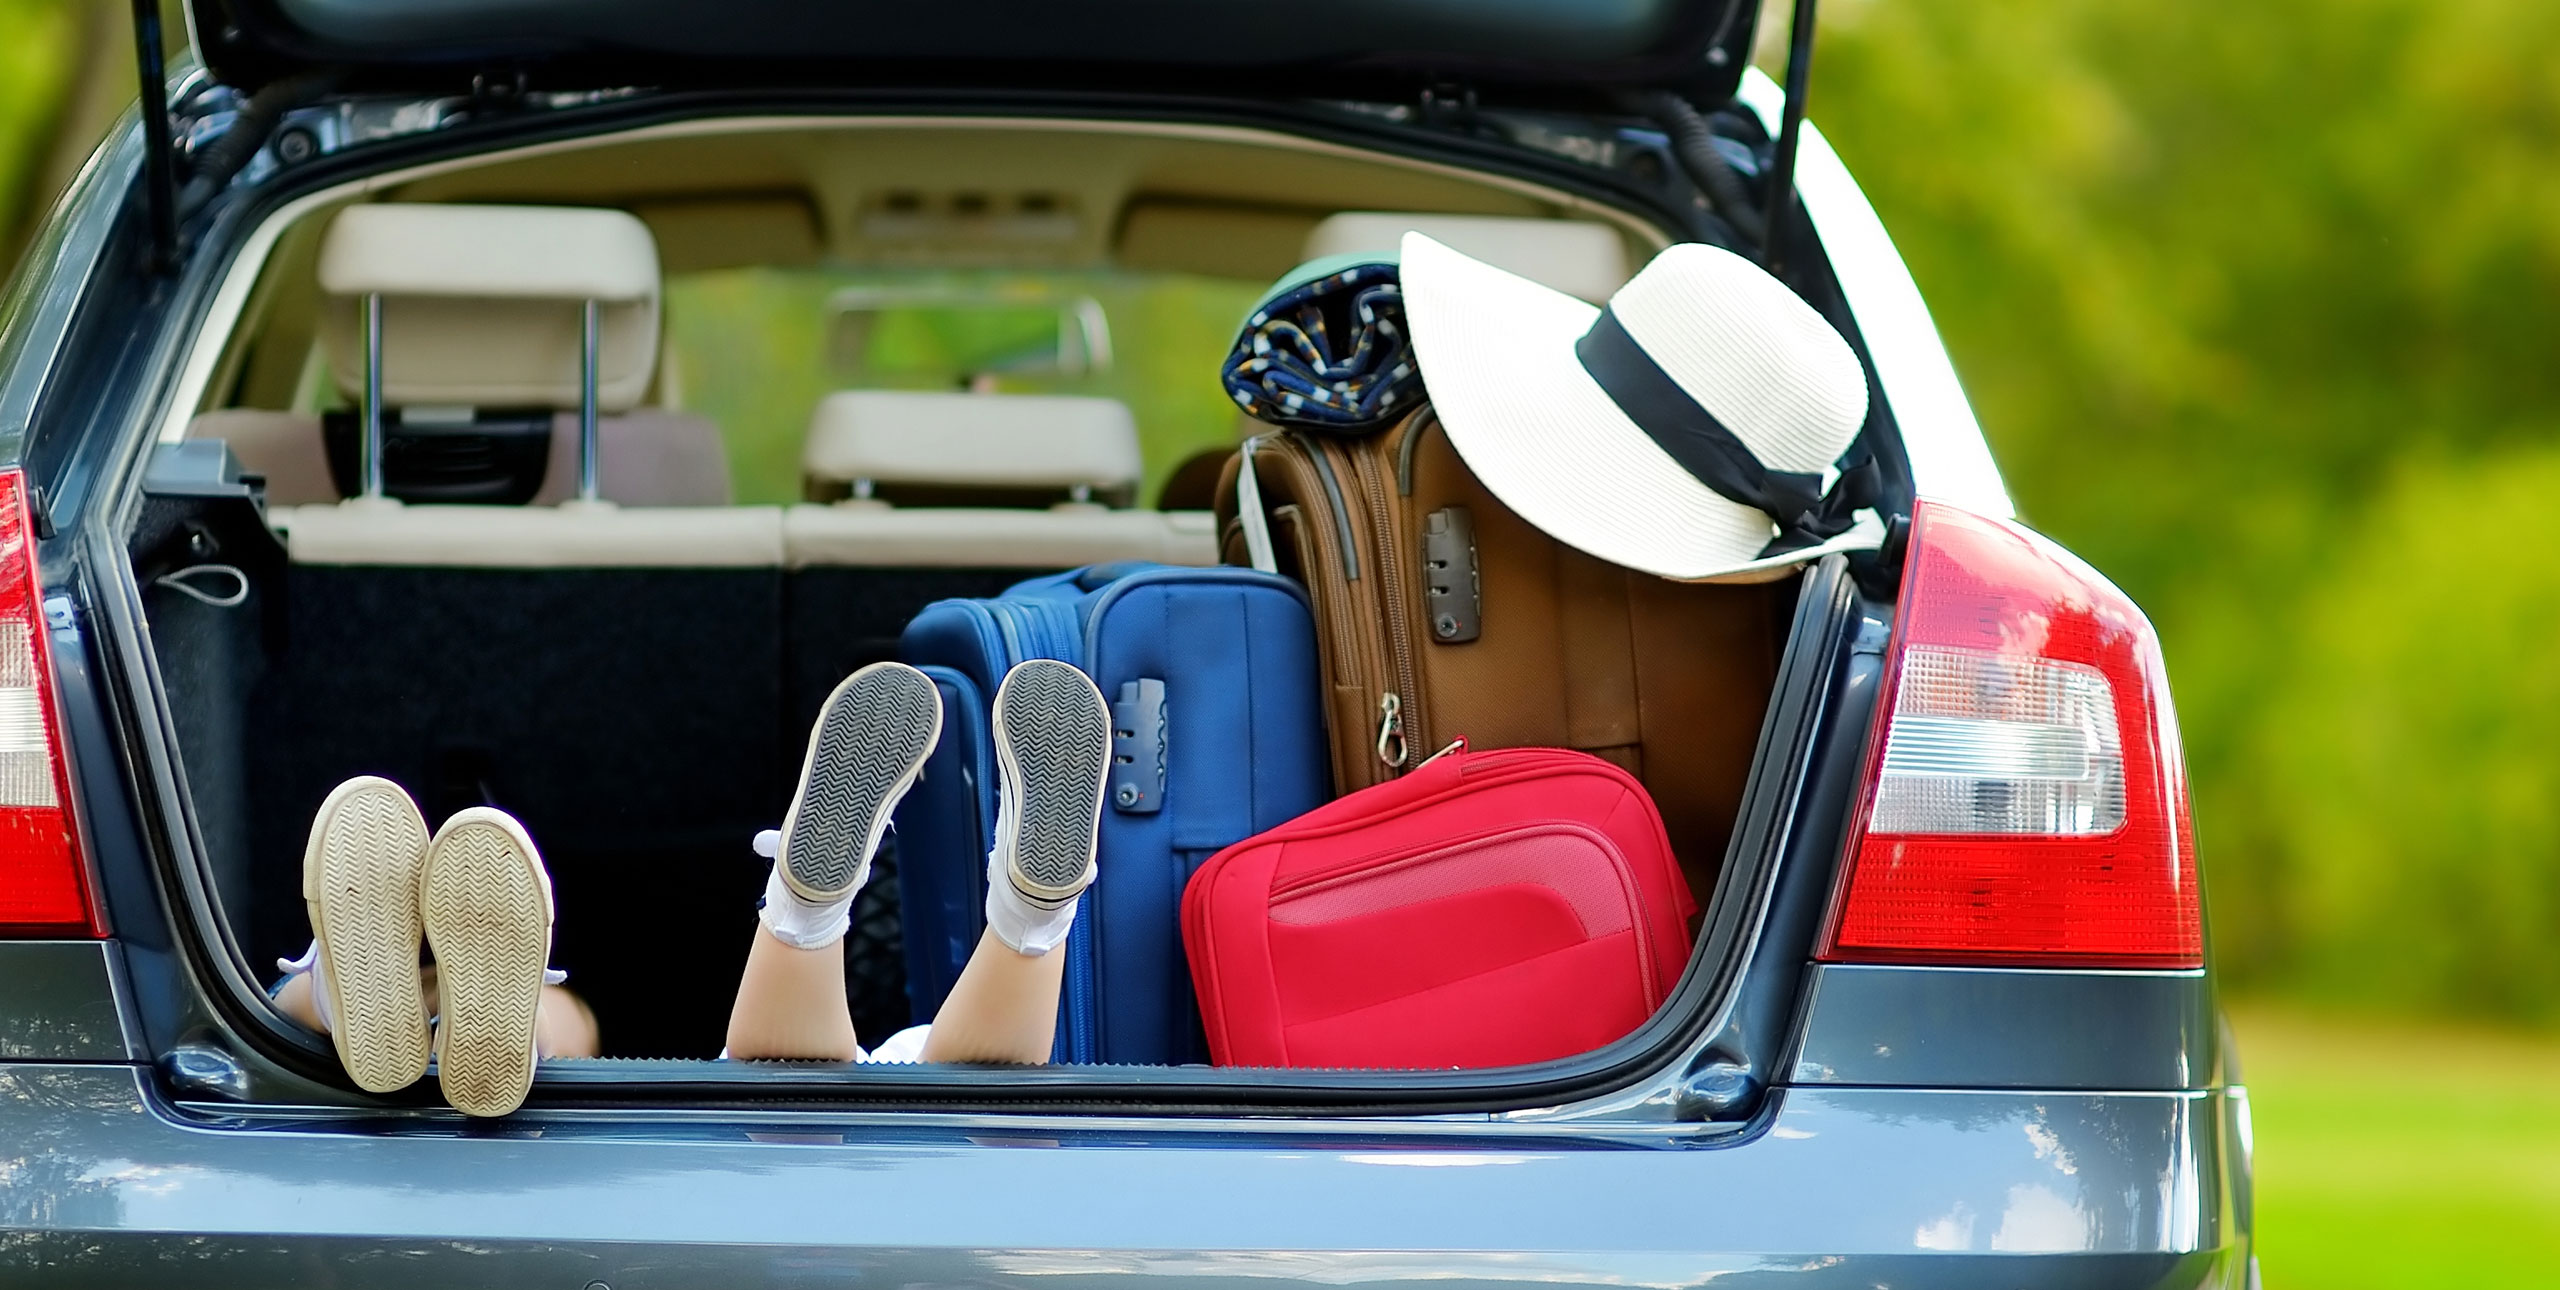 Bags and Kids in Trunk of Car; Courtesy of MN Studio/Shutterstock.com